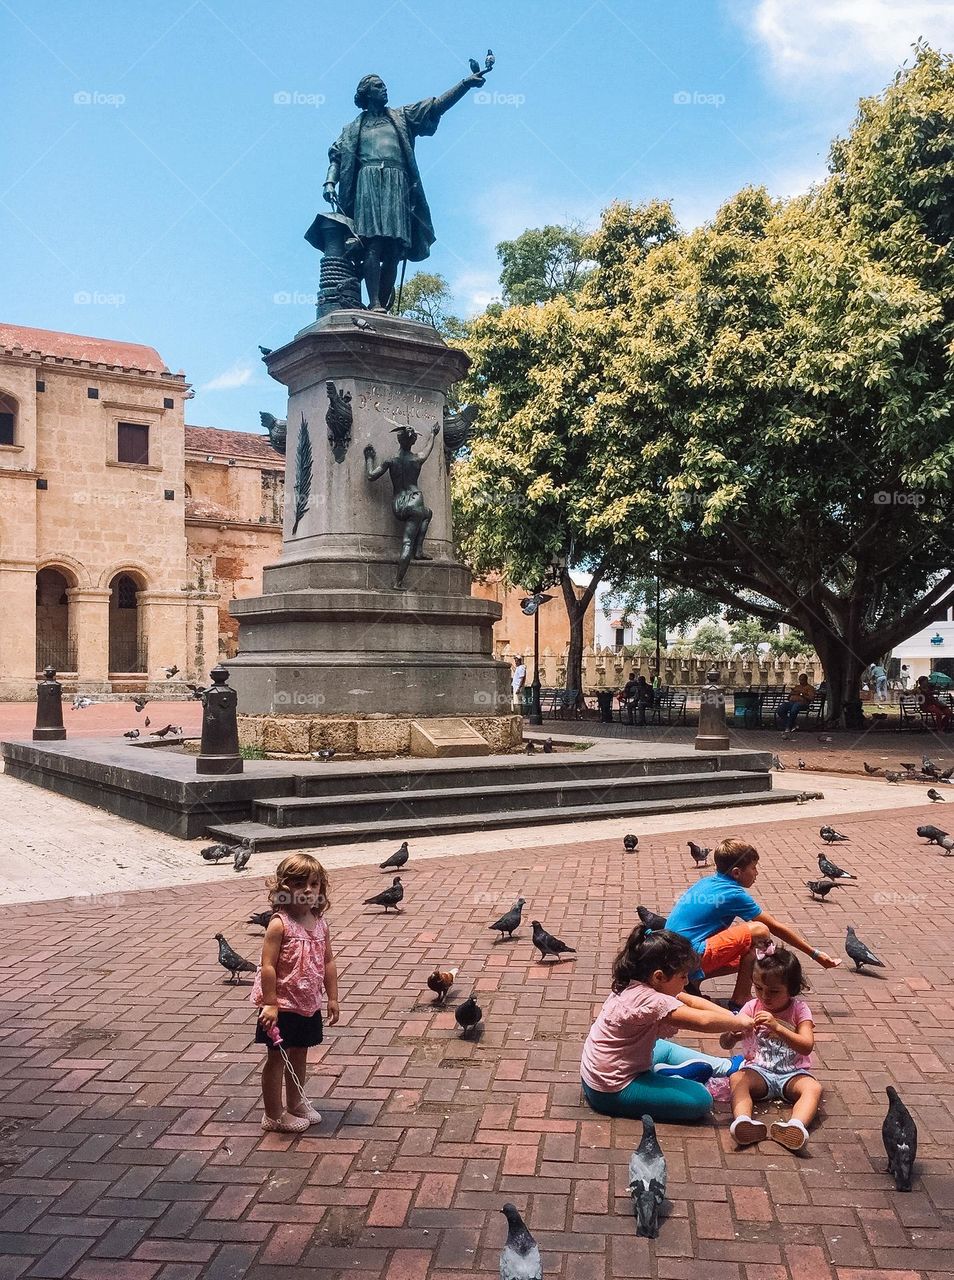 Near the monument to Christopher Columbus in Santo Domingo